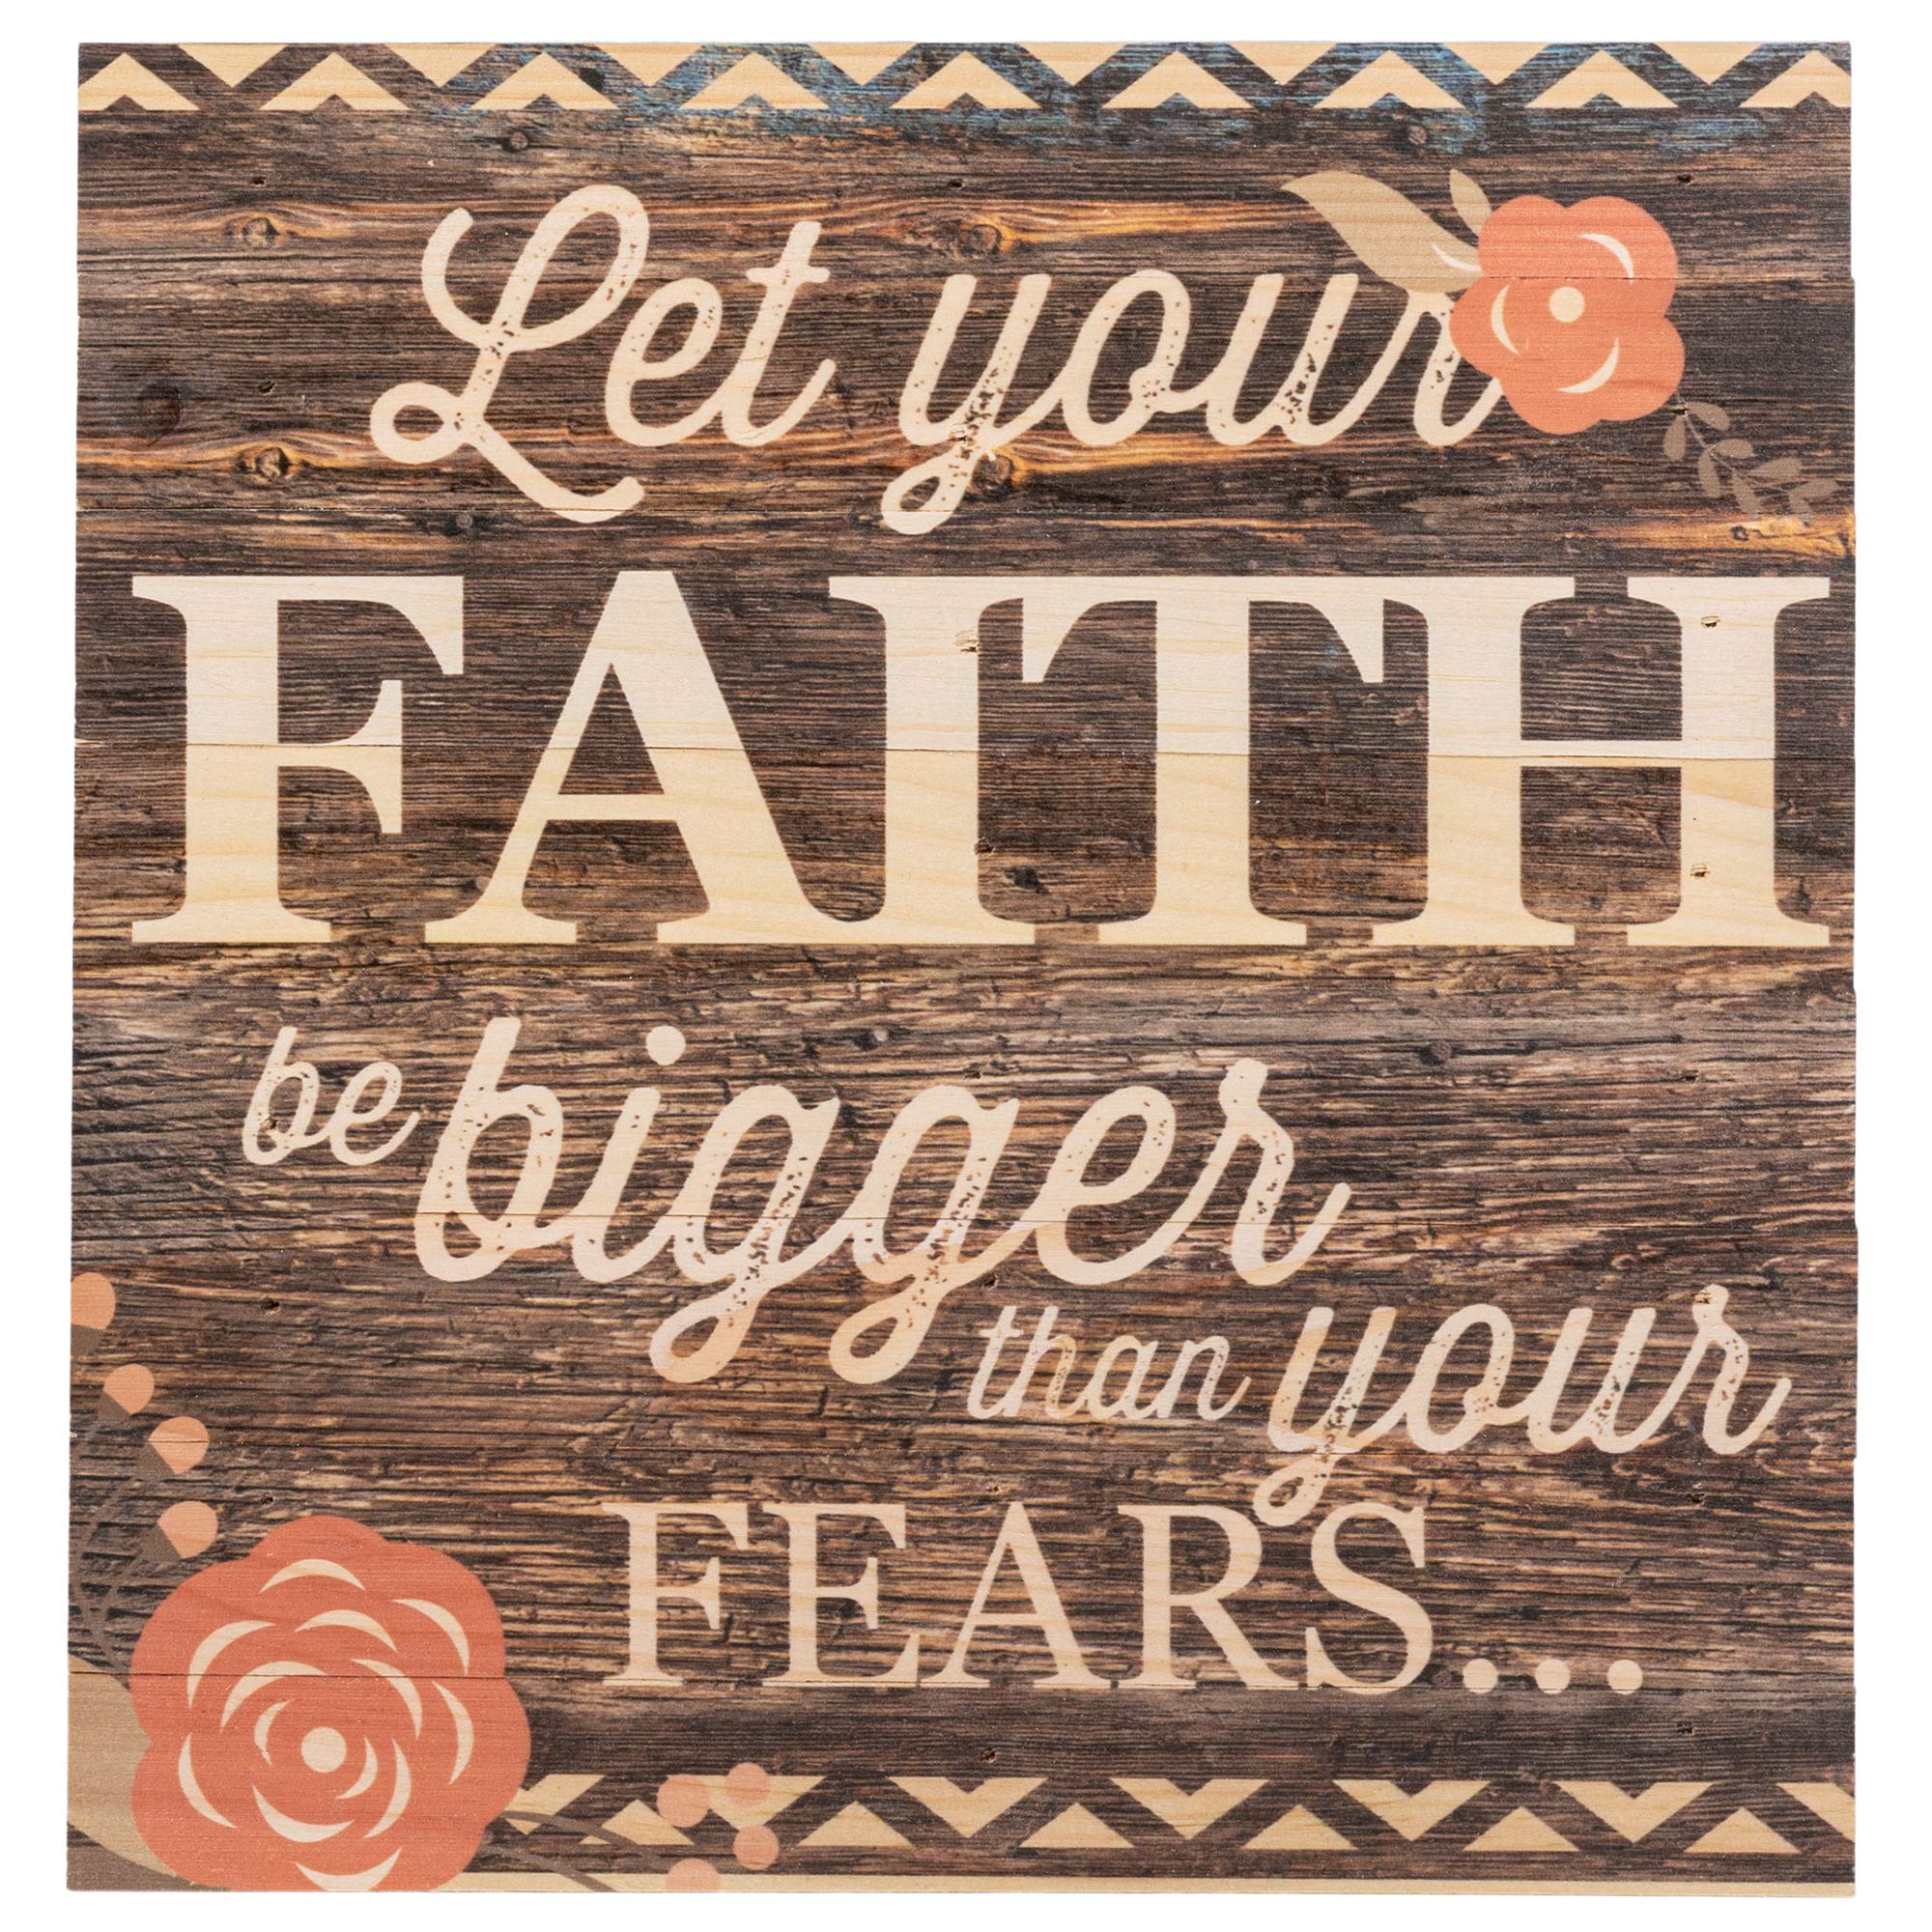 Book Cover Let Your Faith Be Bigger Than Your Fears… 12 x 12 inch Pine Wood Plank Wall Sign Plaque